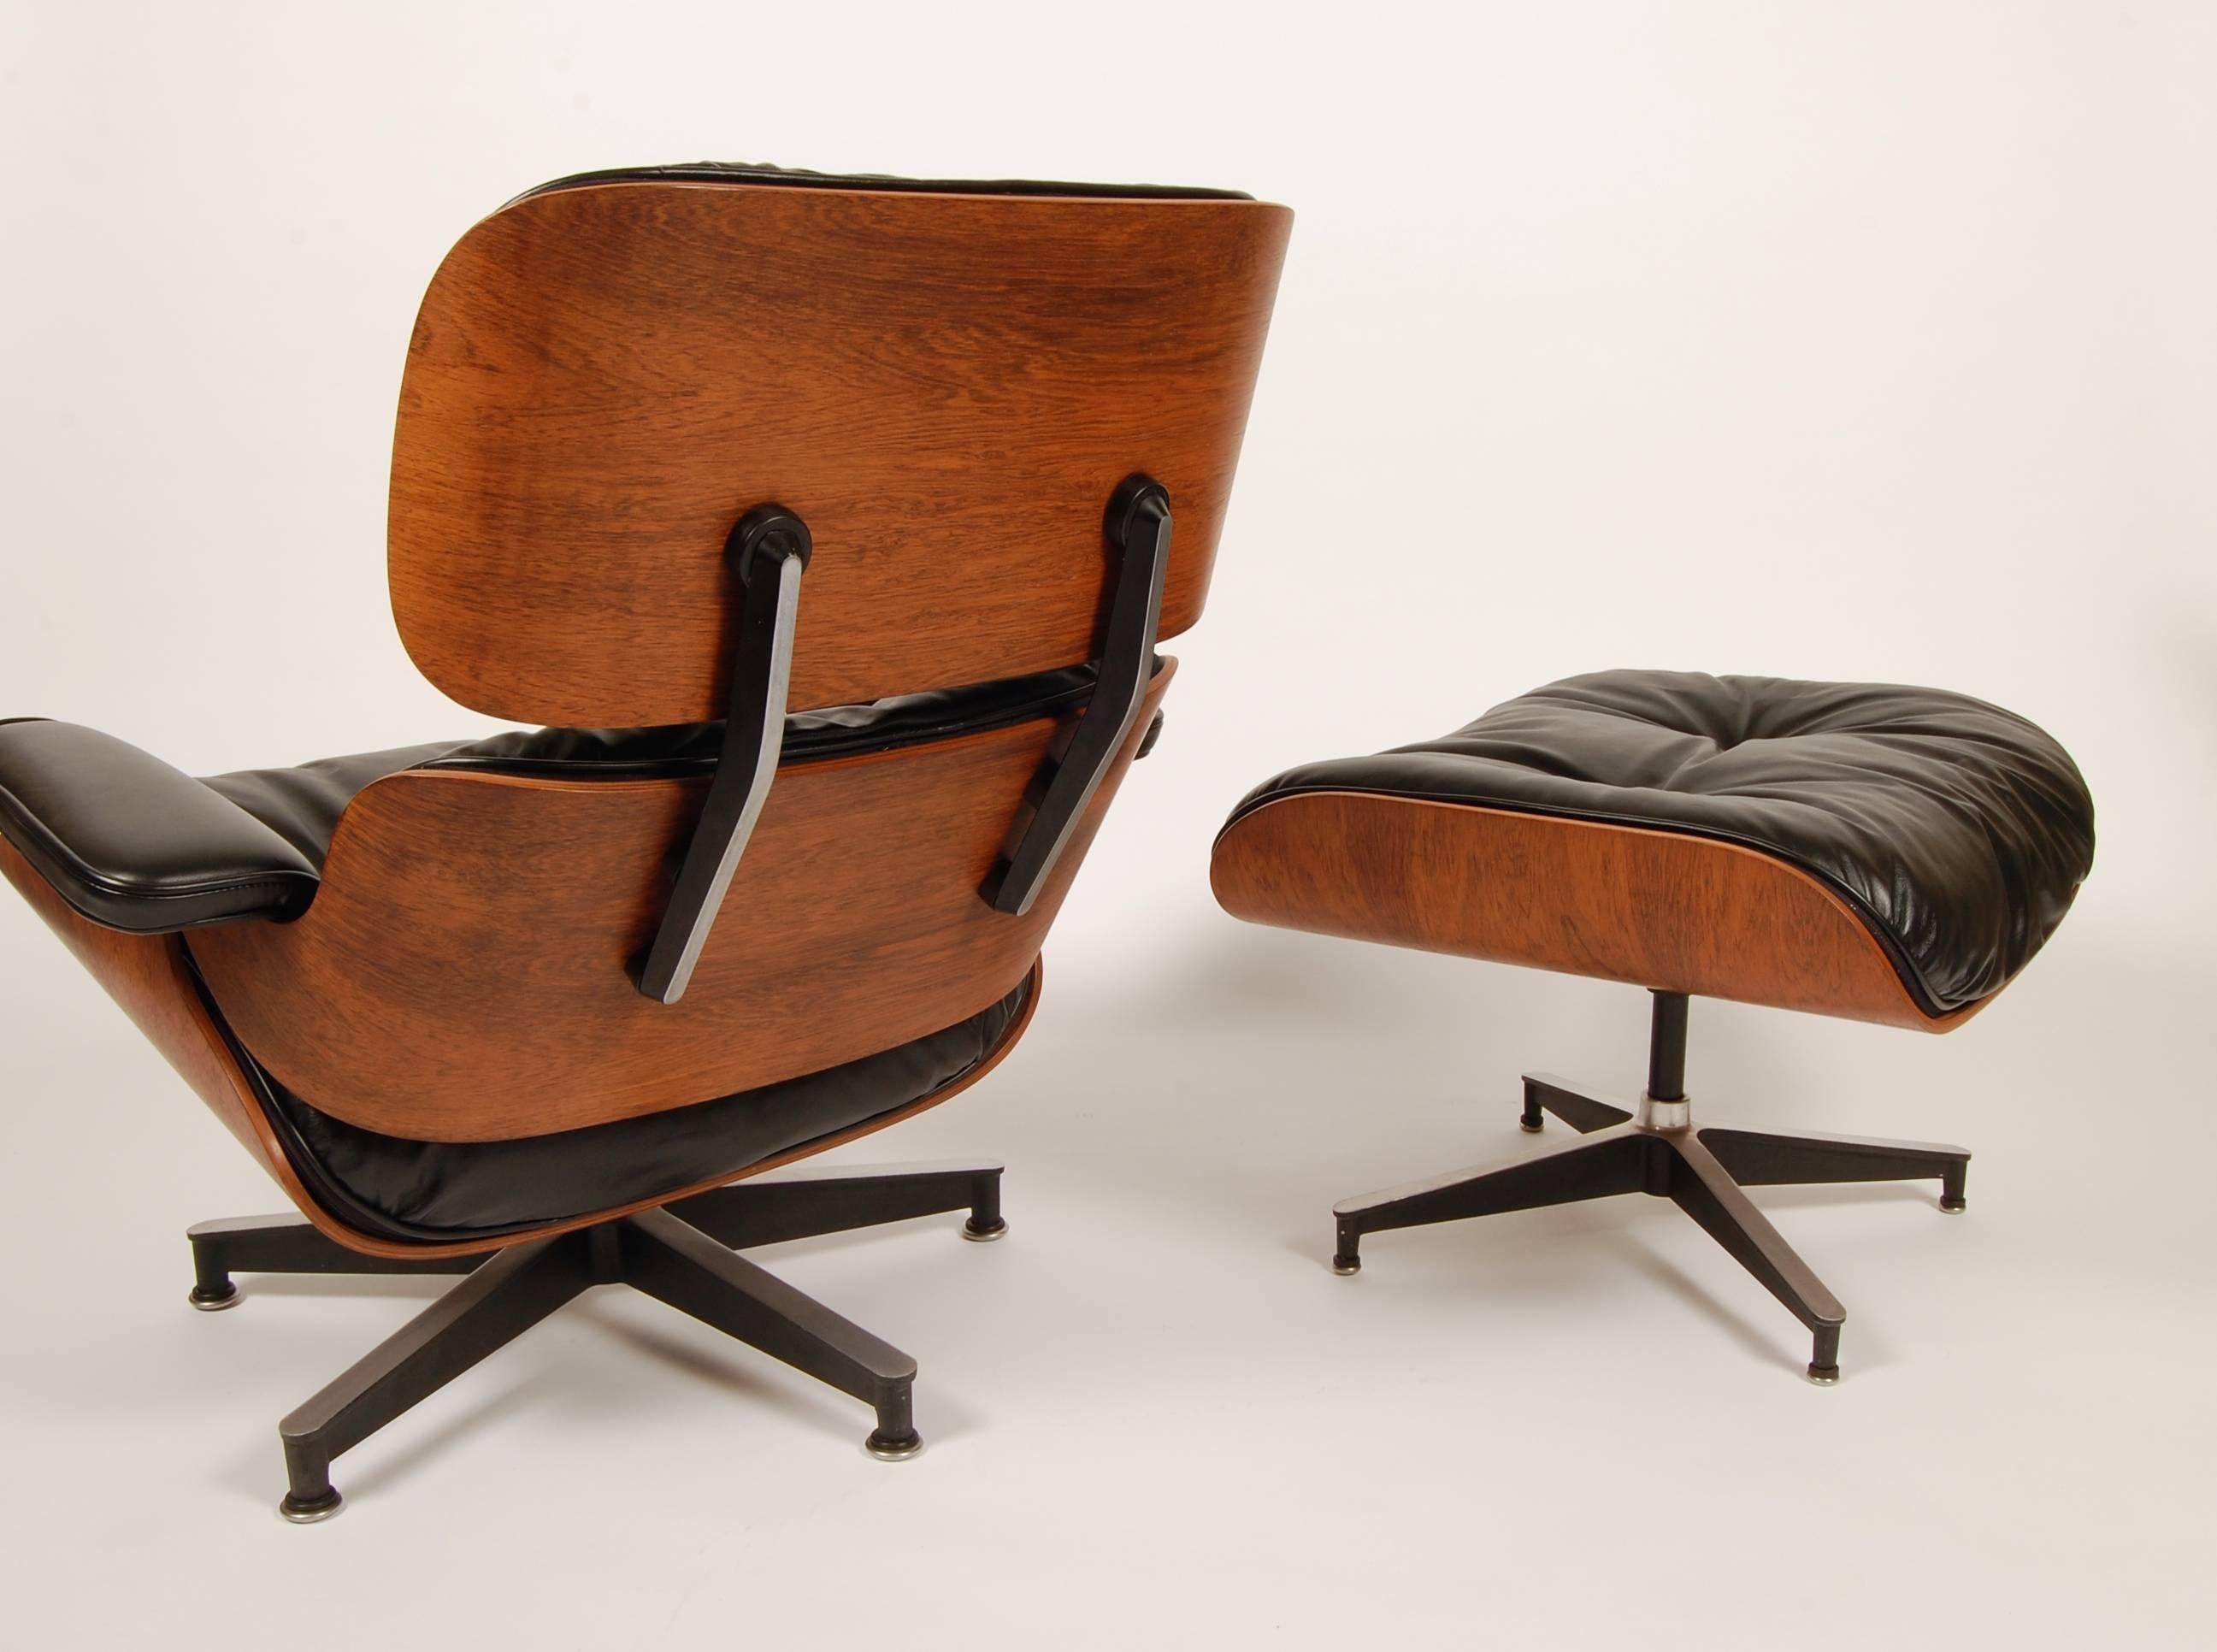 1960s production iconic Eames rosewood lounge and ottoman. Freshly conserved Brazilian rosewood shells and newly upholstered in period correct and quality black leather with the down, feather and latex cushions. Both lounge and ottoman retain the